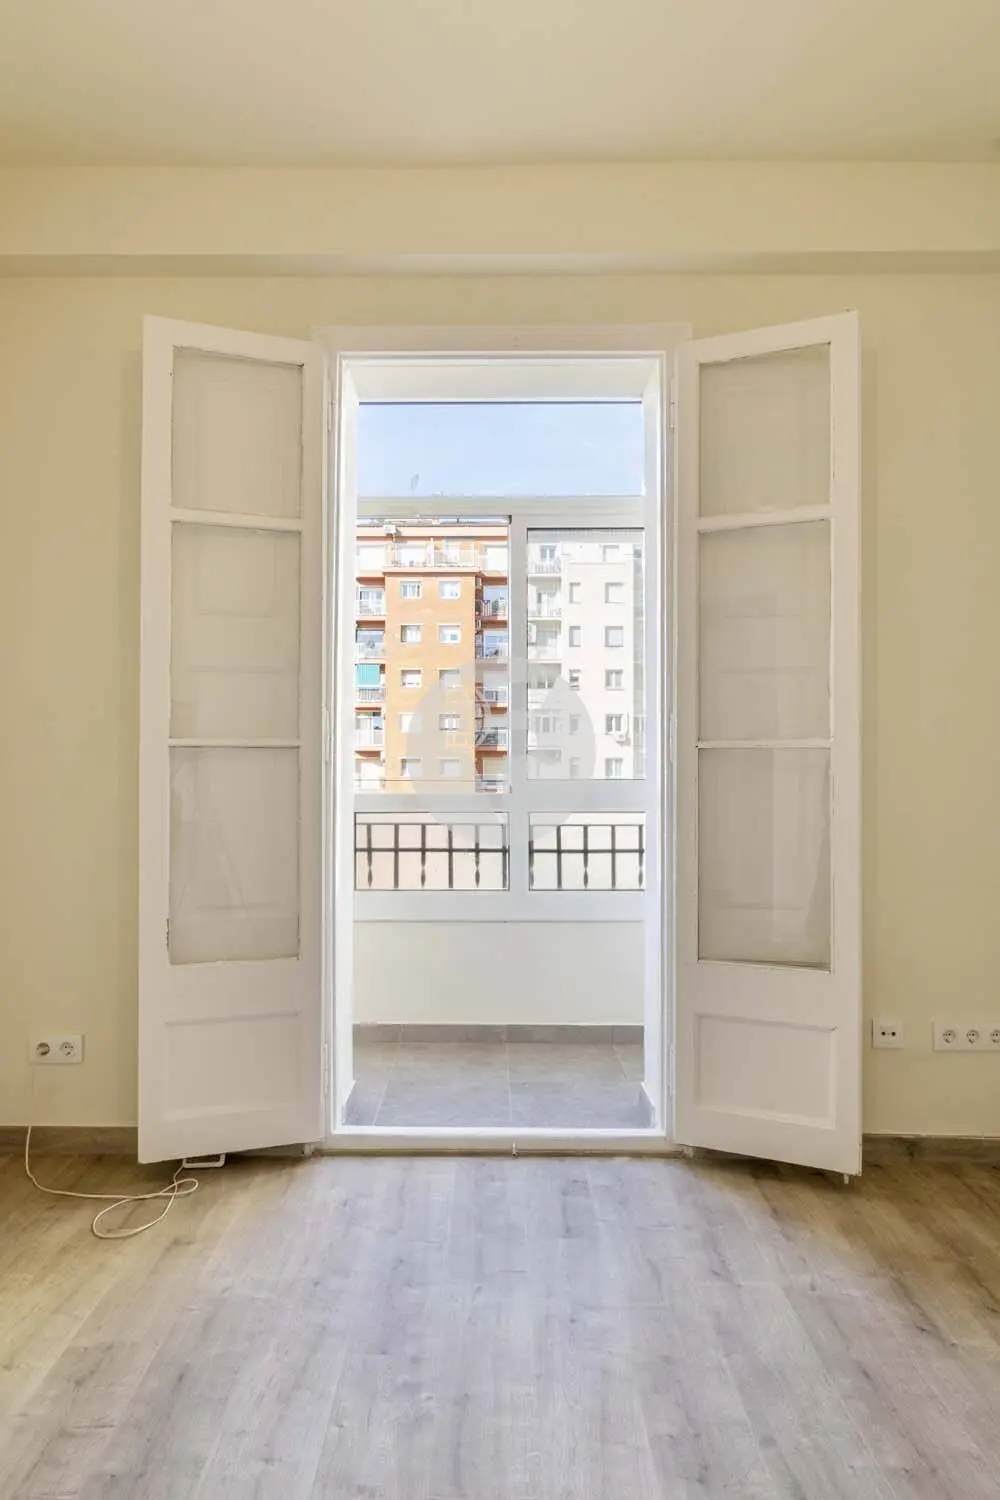 Renovated to brand new apartment in Rocafort street